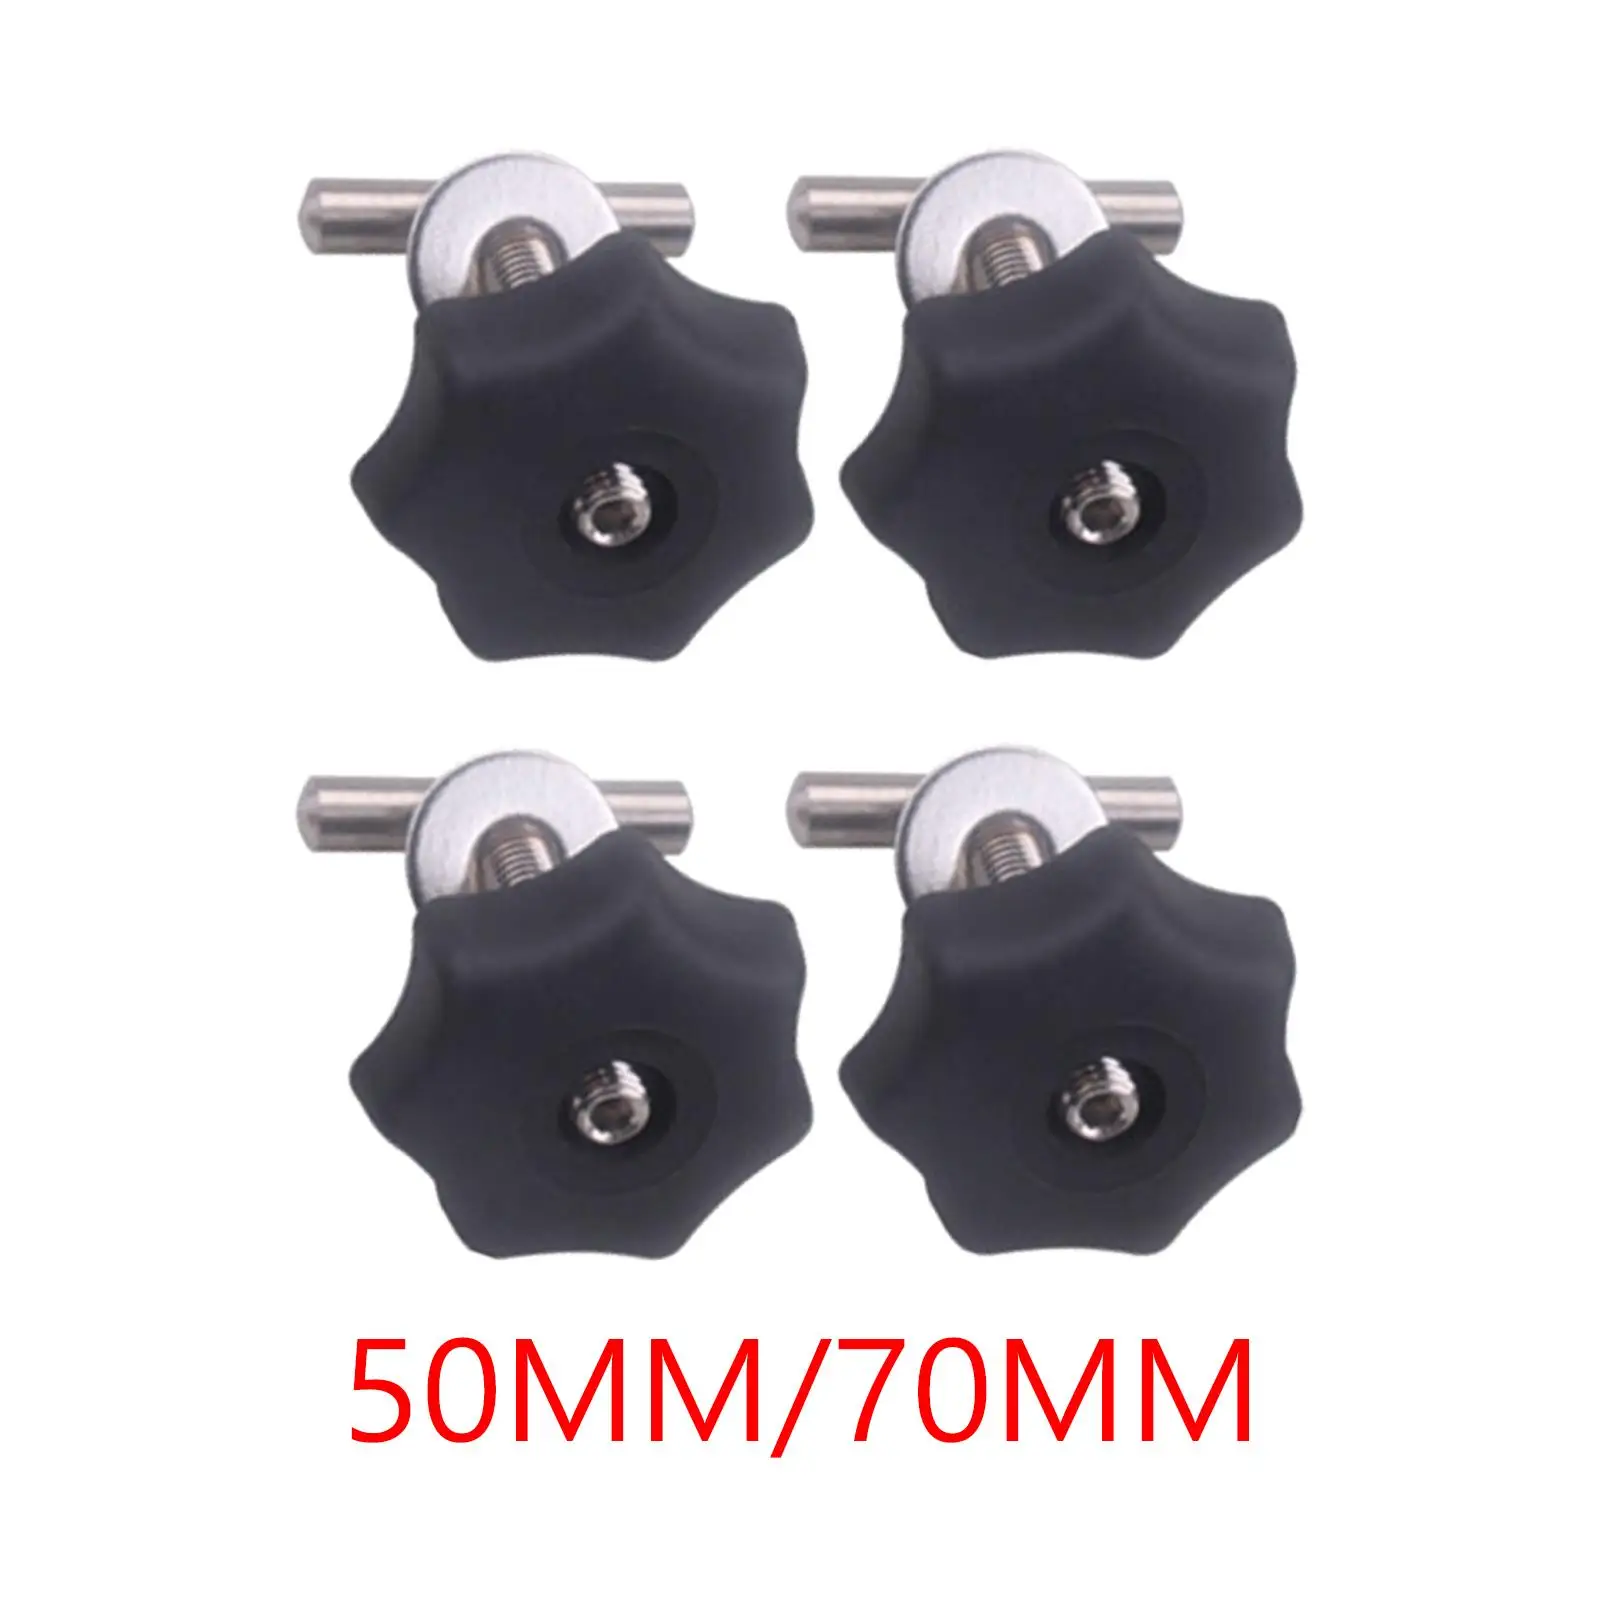 4Pcs Locking Rail Screws Bolt Set Mounting Accessories Stainless Steel Stable Fixing Screws set for T5 Multiflexboard